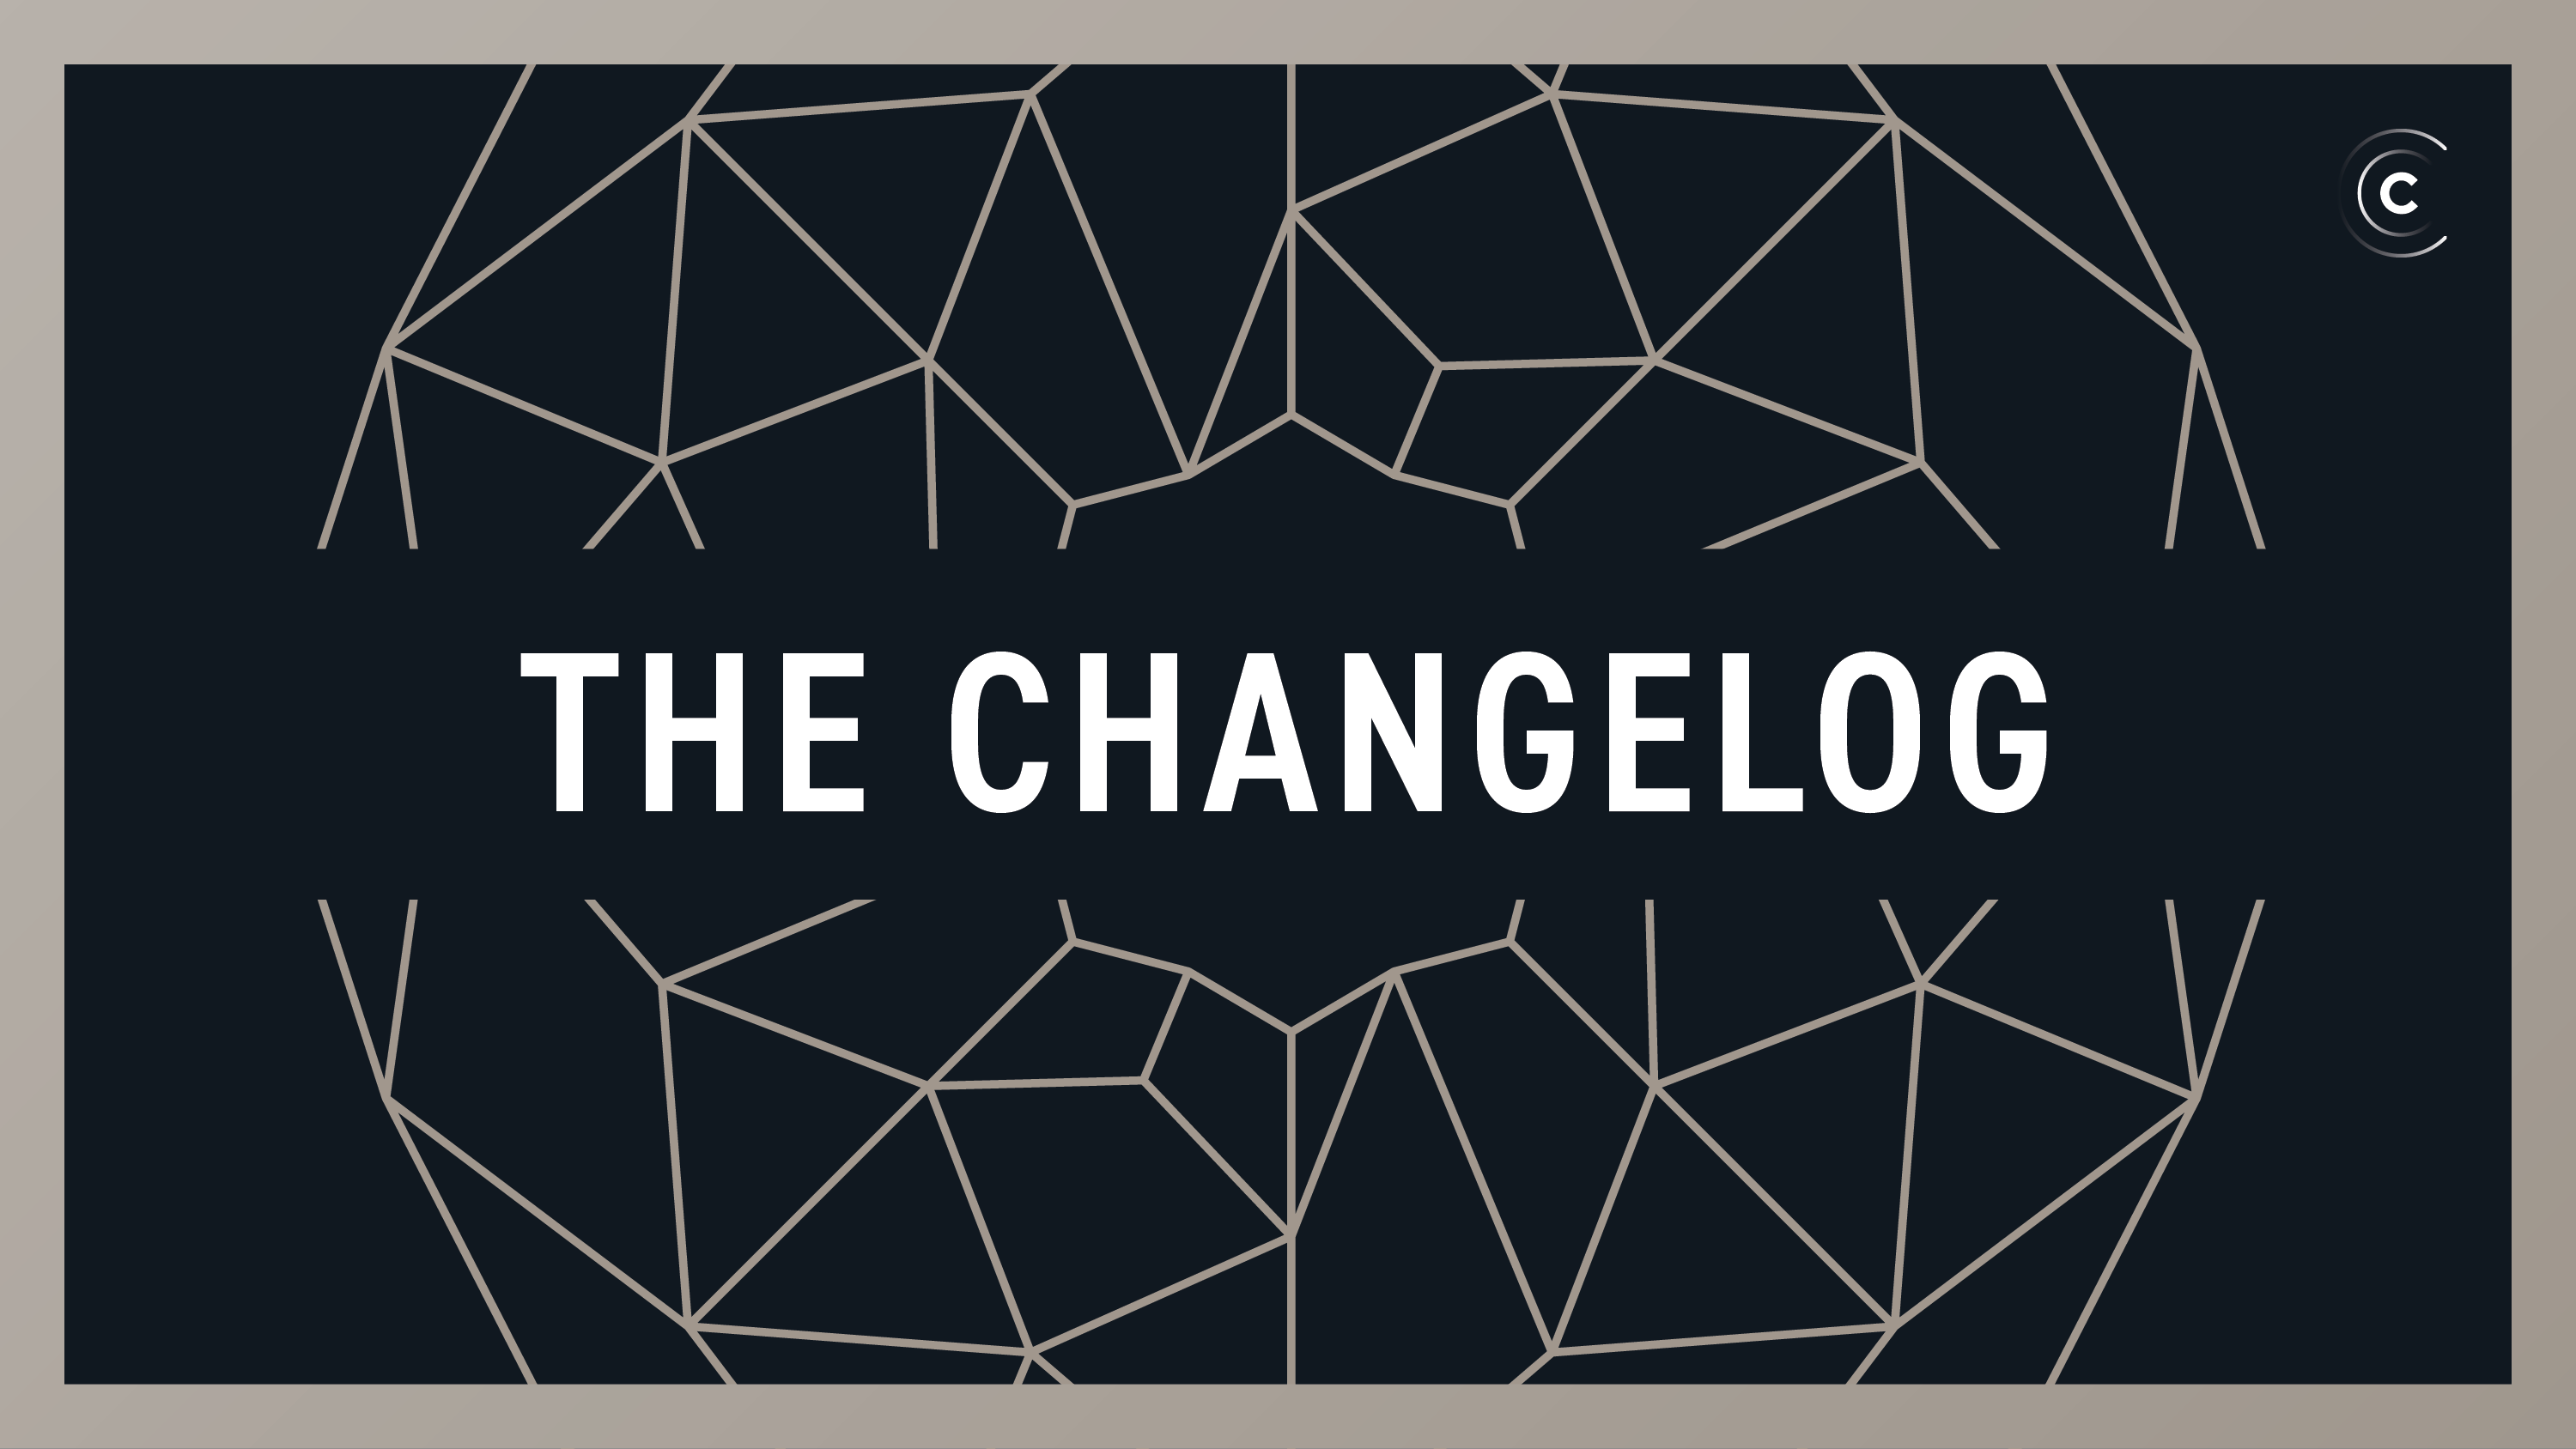 Changelog News: Free Heroku EOL, Stable Diffusion 2.0, Twitter SRE explains why it stays up, Git Notes & Joel Lord